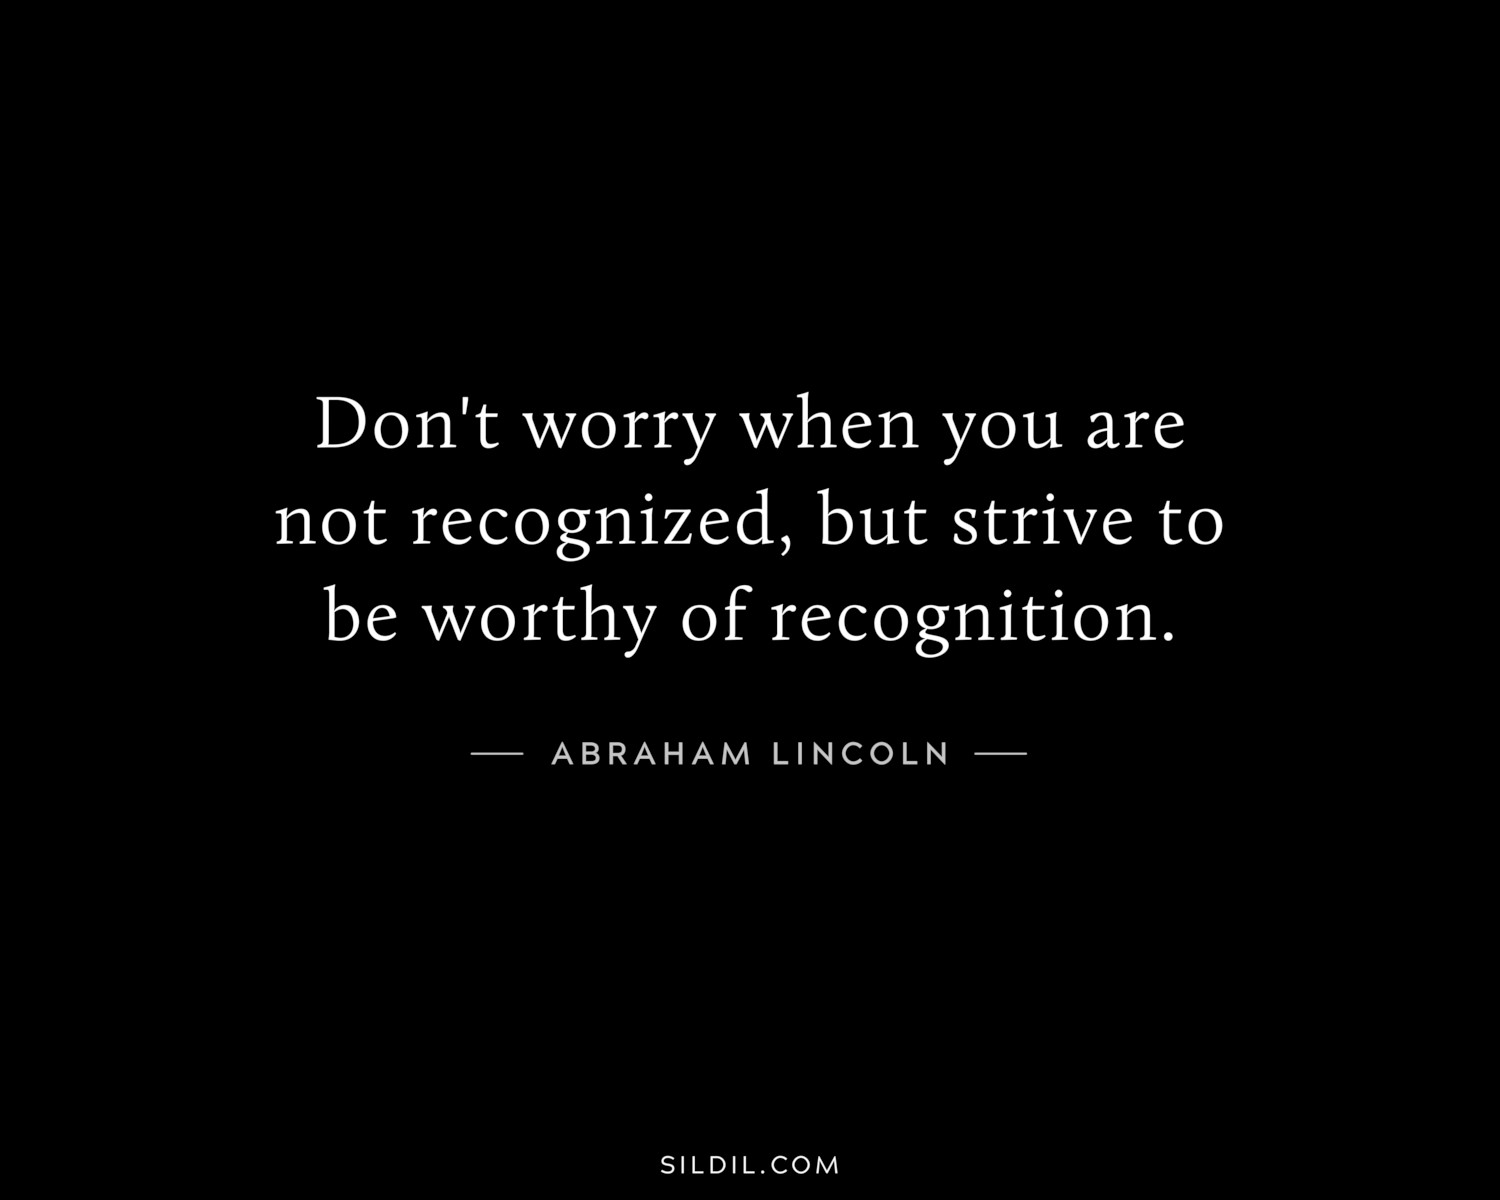 Don't worry when you are not recognized, but strive to be worthy of recognition.